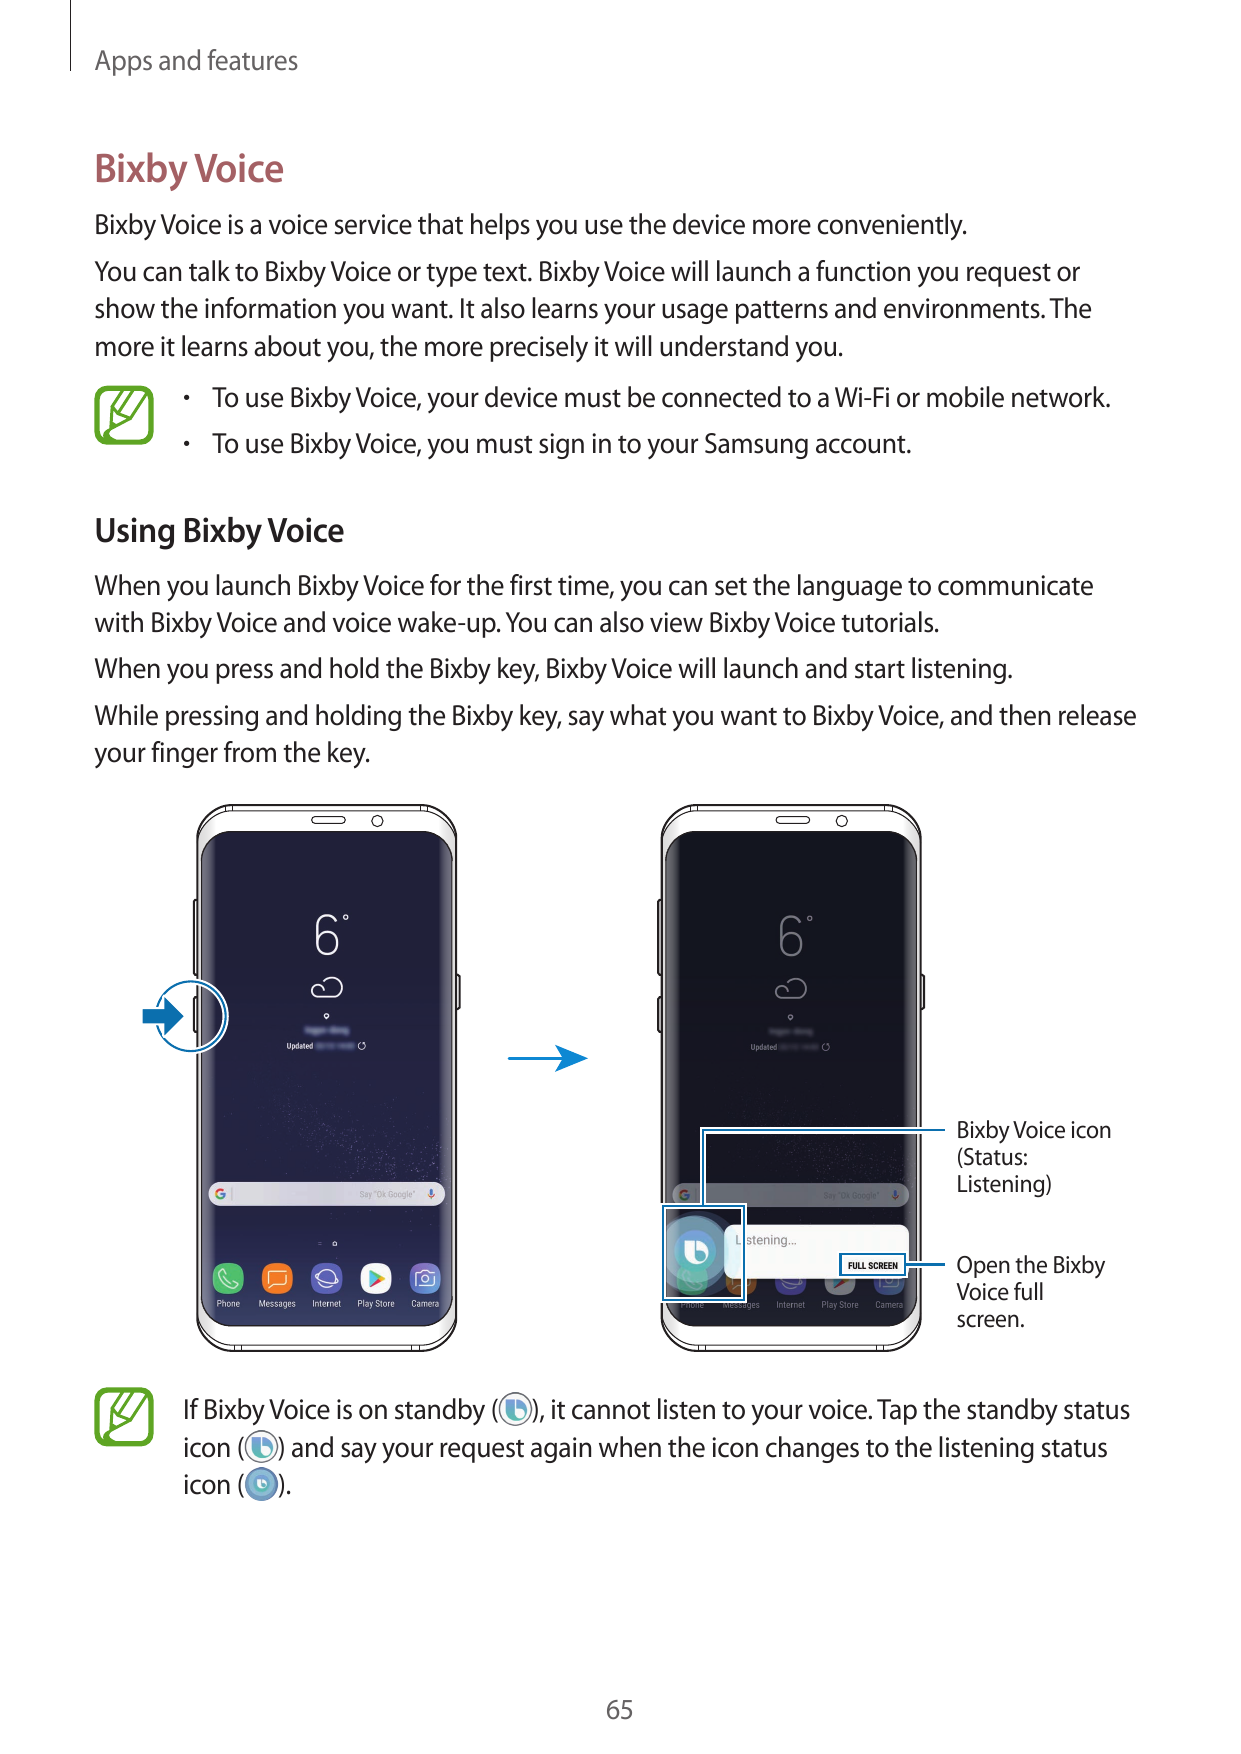 Apps and featuresBixby VoiceBixby Voice is a voice service that helps you use the device more conveniently.You can talk to Bixby